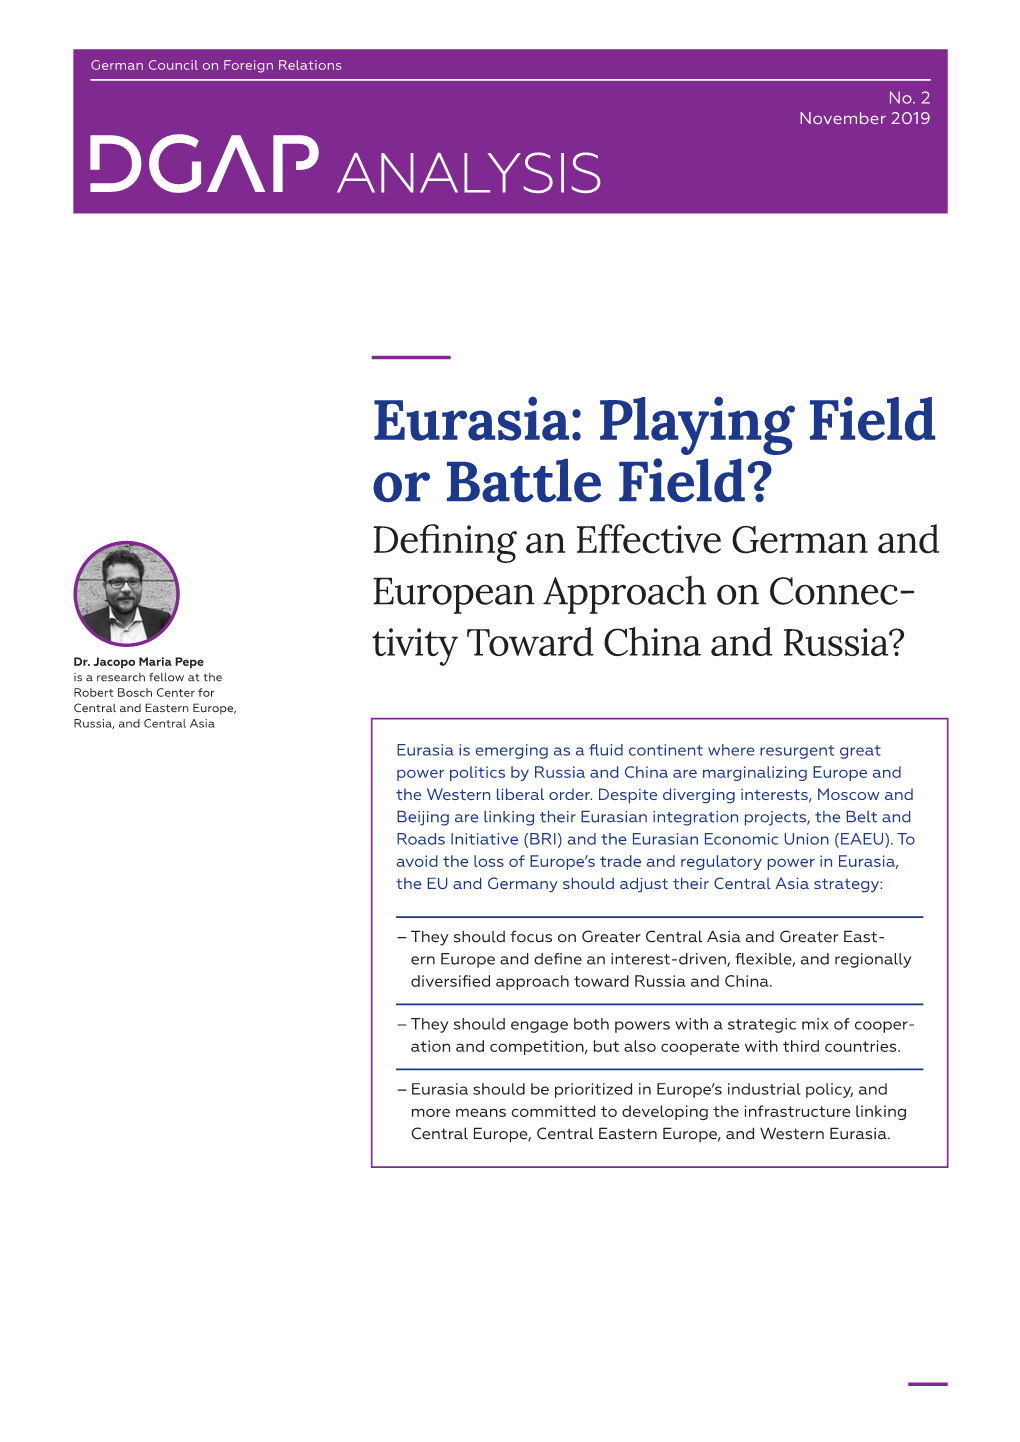 Eurasia: Playing Field Or Battle Field? Defining an Effective German and European Approach on Connec